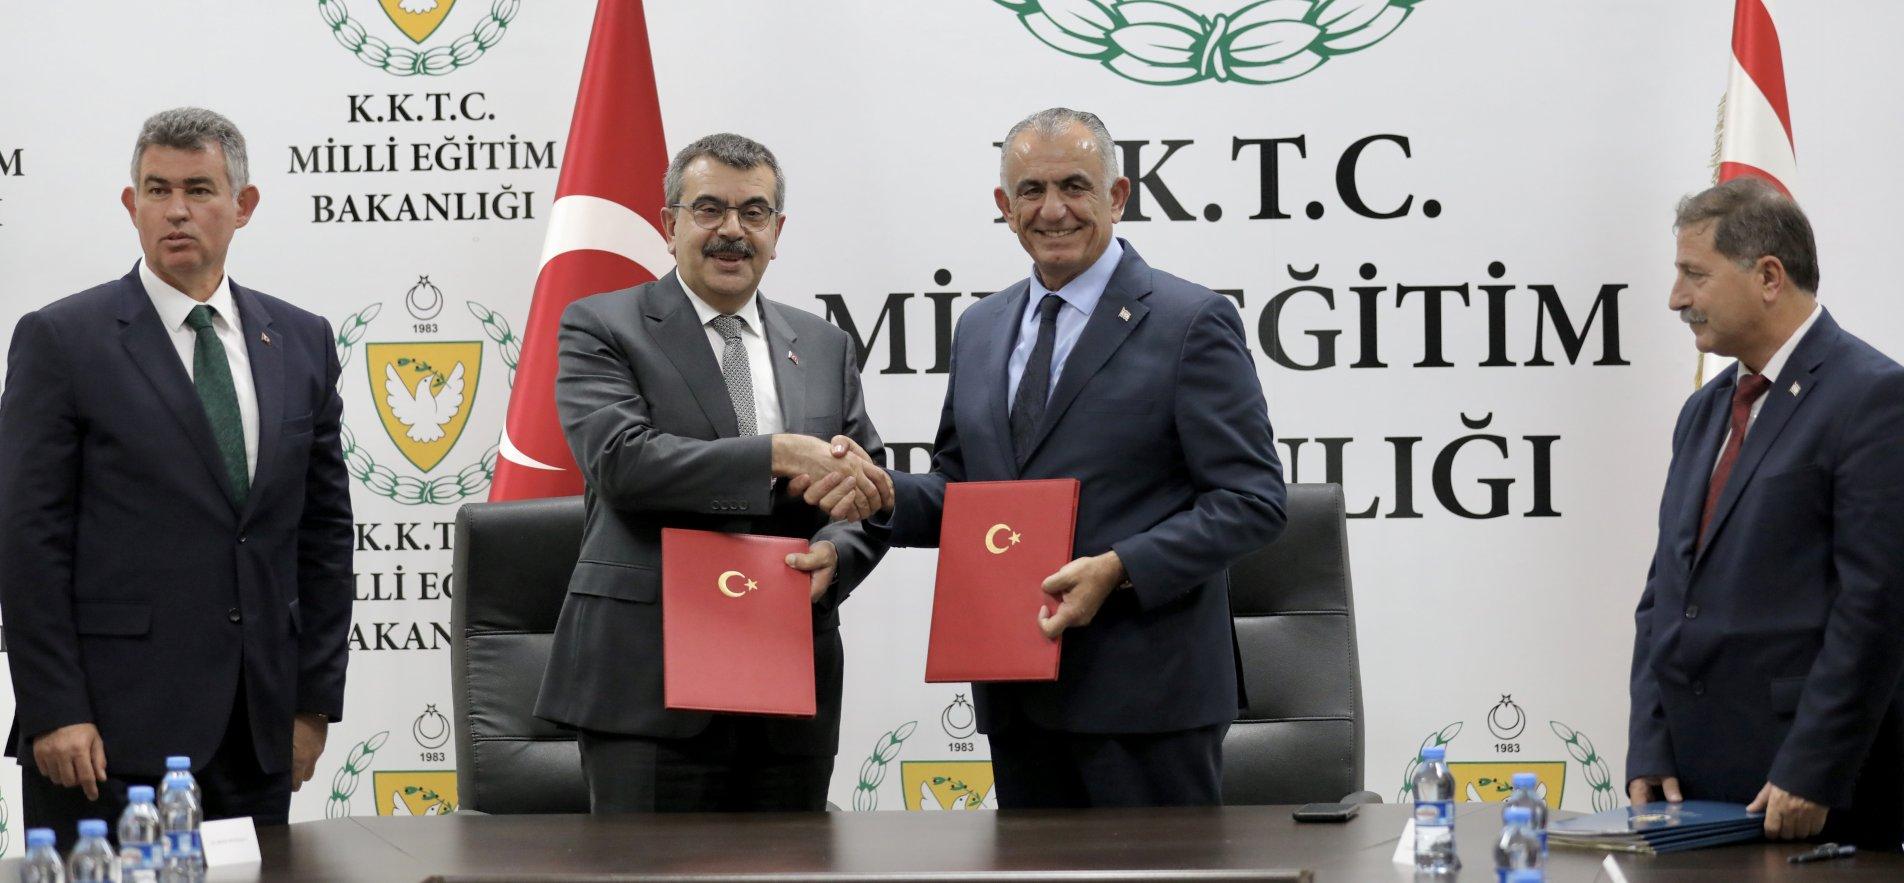 TÜRKİYE AND TRNC SIGNED A COOPERATION PROTOCOL IN THE FIELD OF EDUCATION